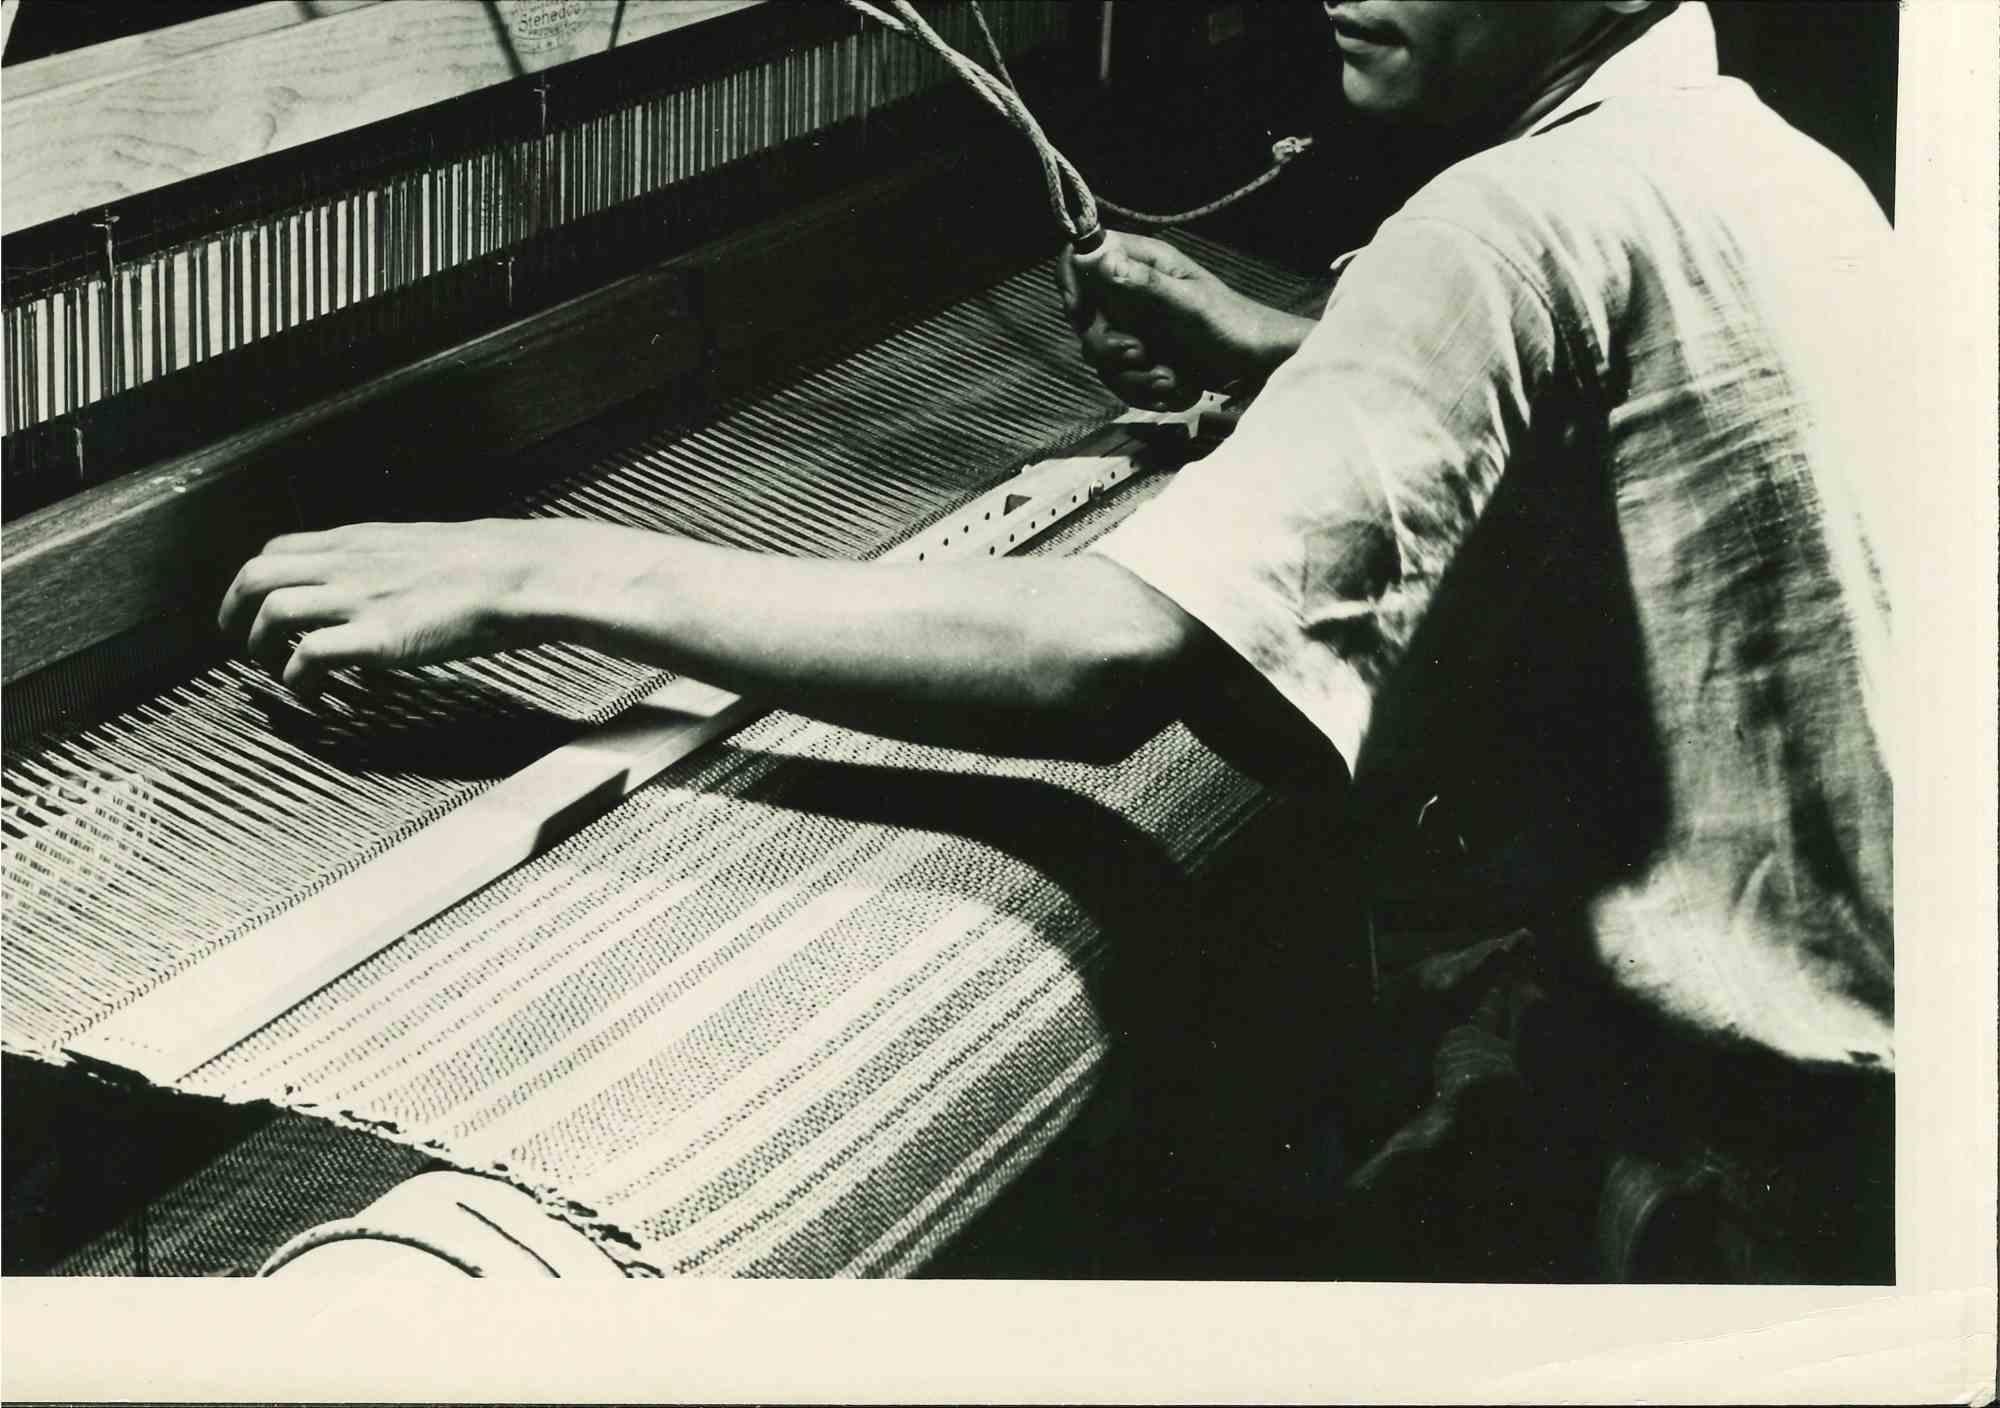 Unknown Figurative Photograph - Puerto Ricans Textile Mill - American Vintage Photograph - Mid 20th Century